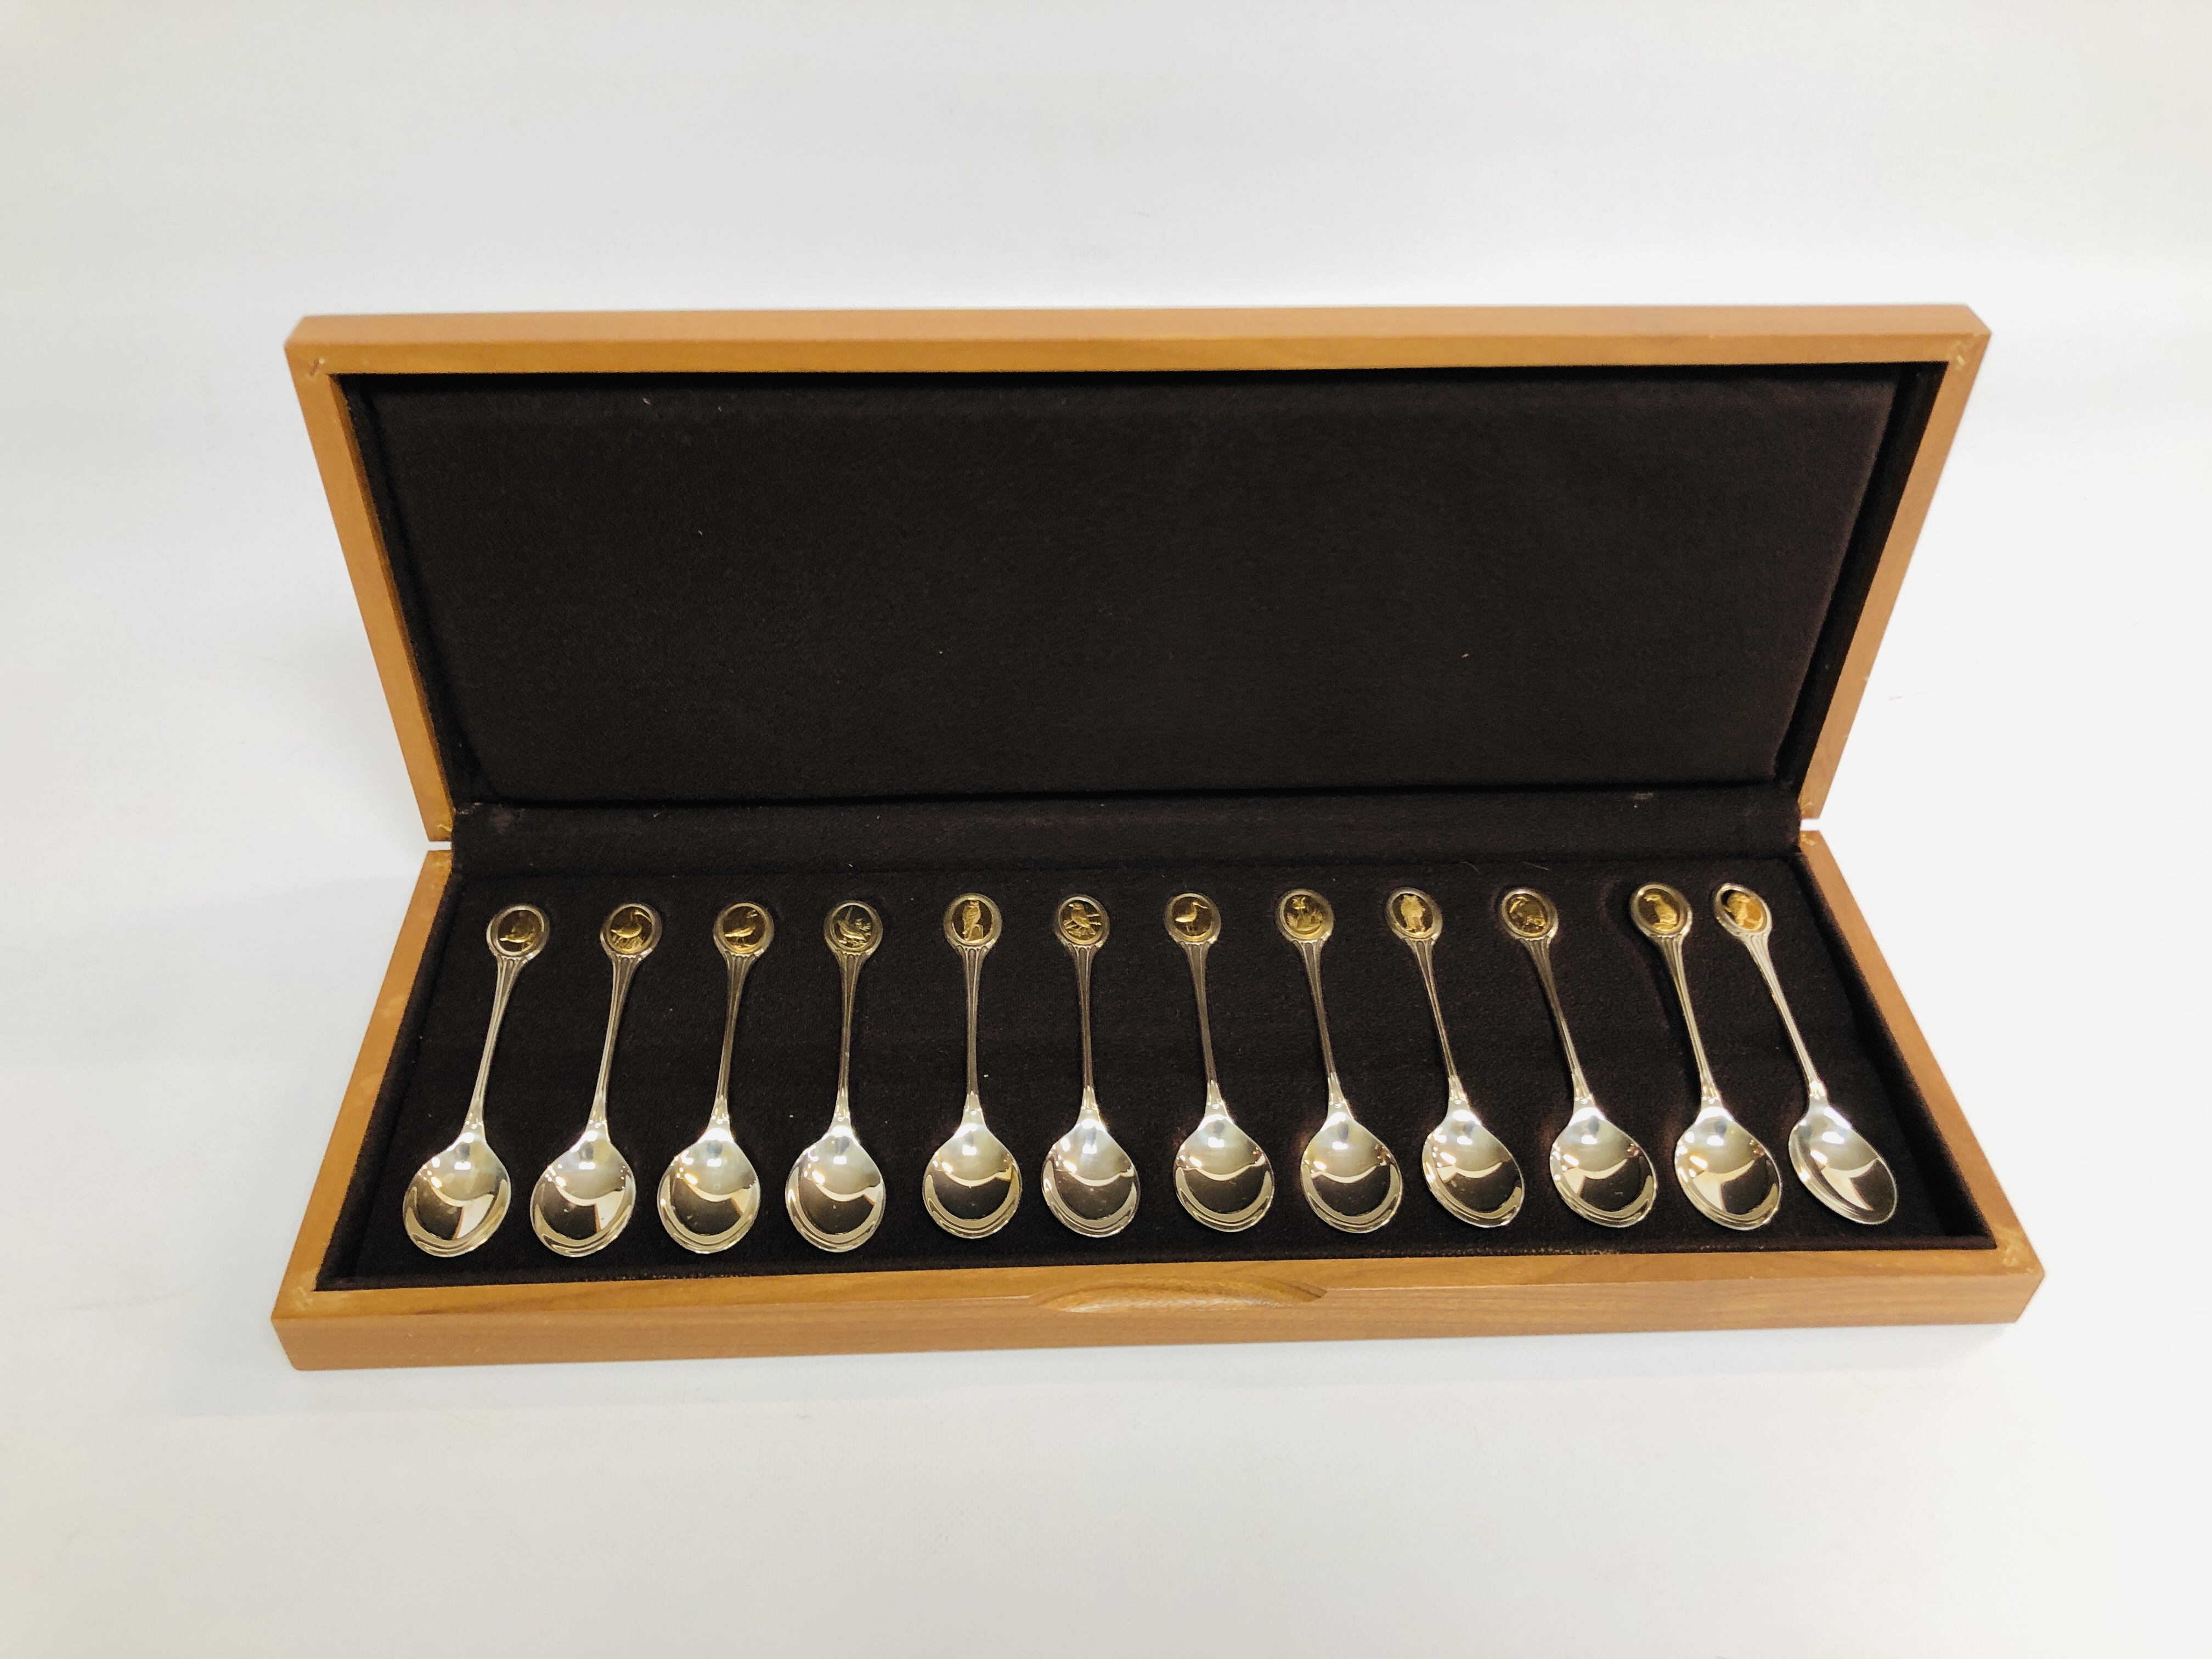 RSPB "THE ROYAL SOCIETY FOR THE PROTECTION OF BIRDS" CASED SET OF TWELVE SILVER SPOONS